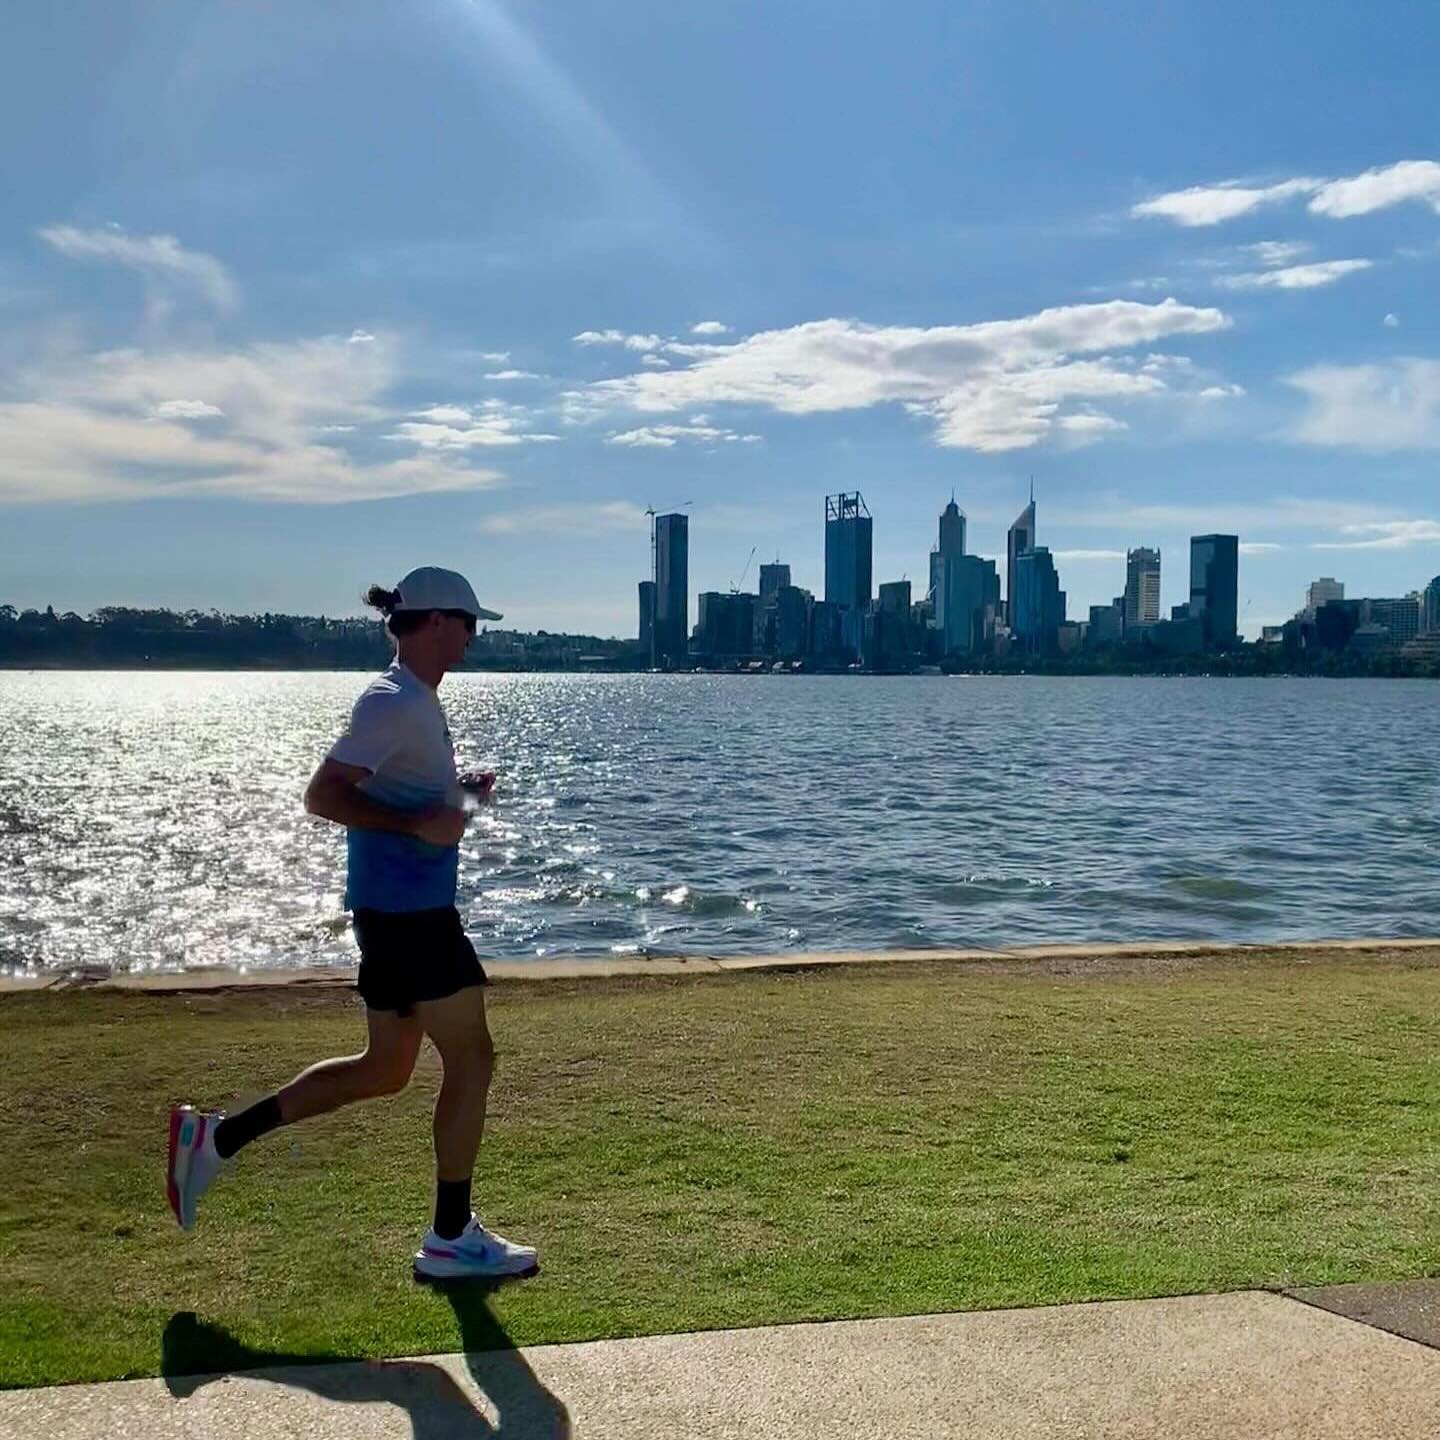 The incredible @mitchell_grey has just ticked over the 4 week mark completing 28 marathons out of 60 raising funds for 20Talk‼️

He&rsquo;s been setting out daily on these runs and is now just shy of $120,000 and counting 🥲

Already running the dist